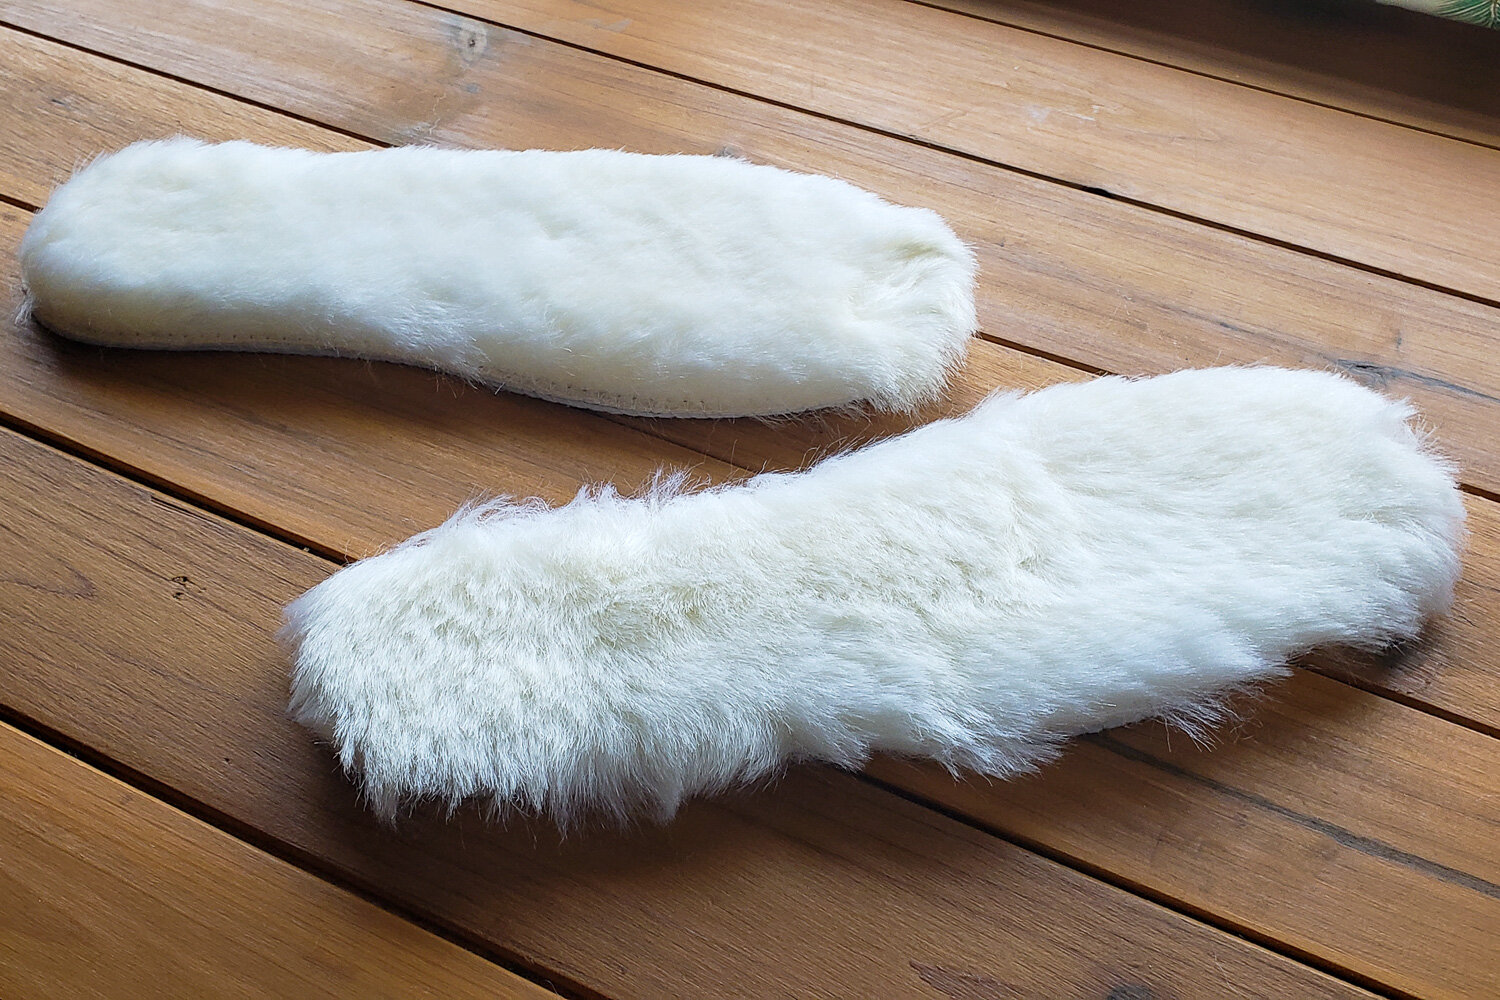 BACOPHY SHEEPSKIN FLEECE INSOLES ADD WARMTH AND CUSHION TO ANY BOOTS OR SHOES - just make sure to size up to accommodate the extra thickness